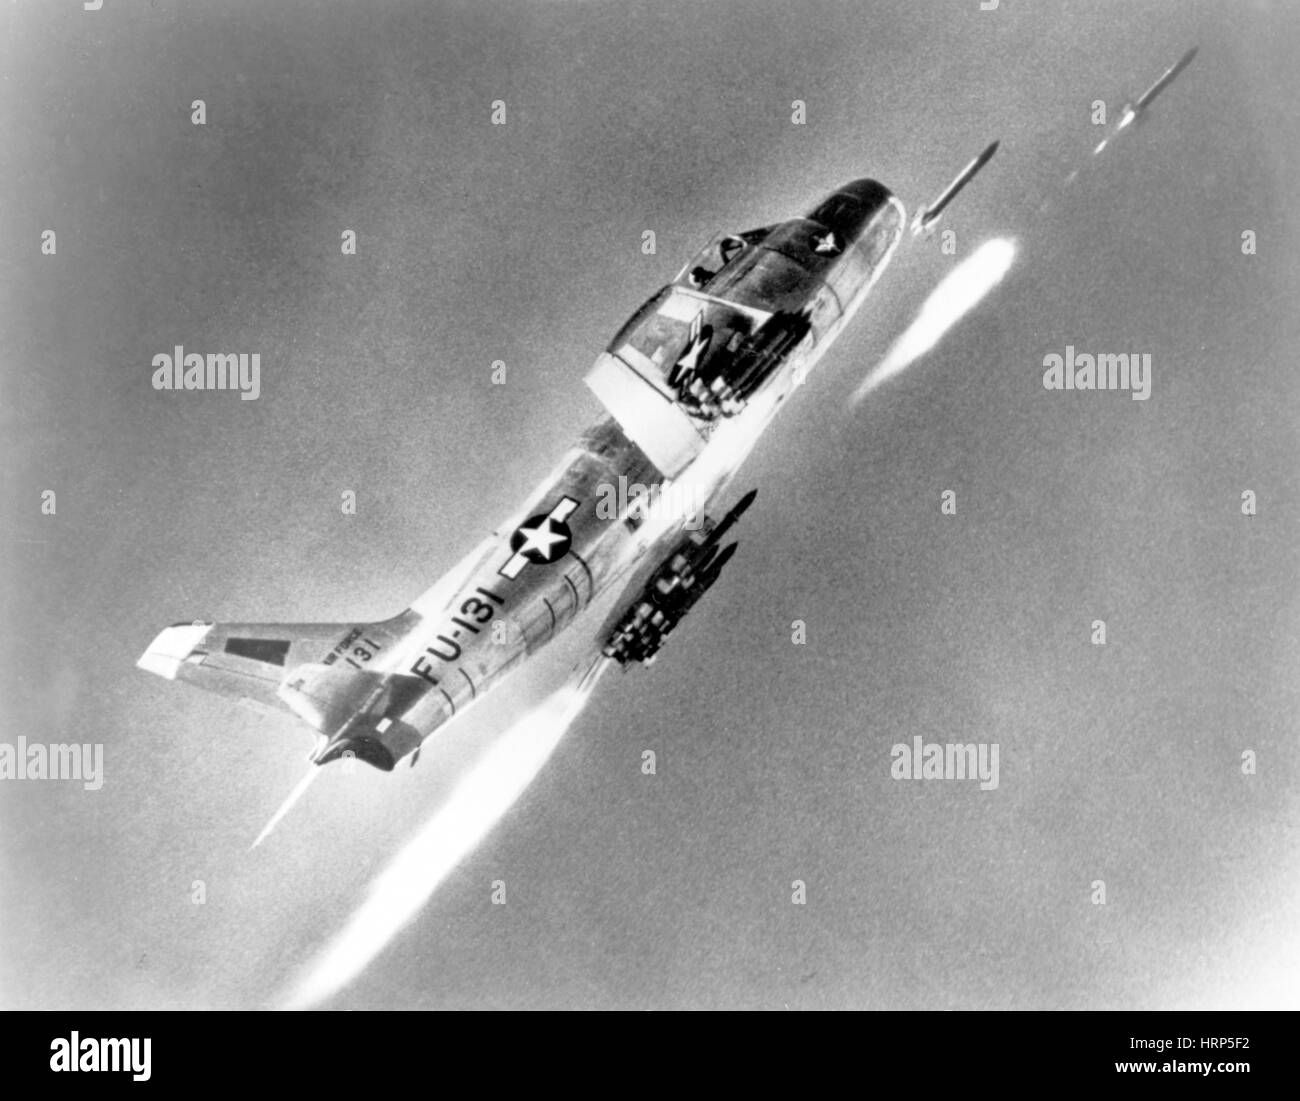 F-86 Sabre, primo Swept-Wing Fighter, 1950s Foto Stock